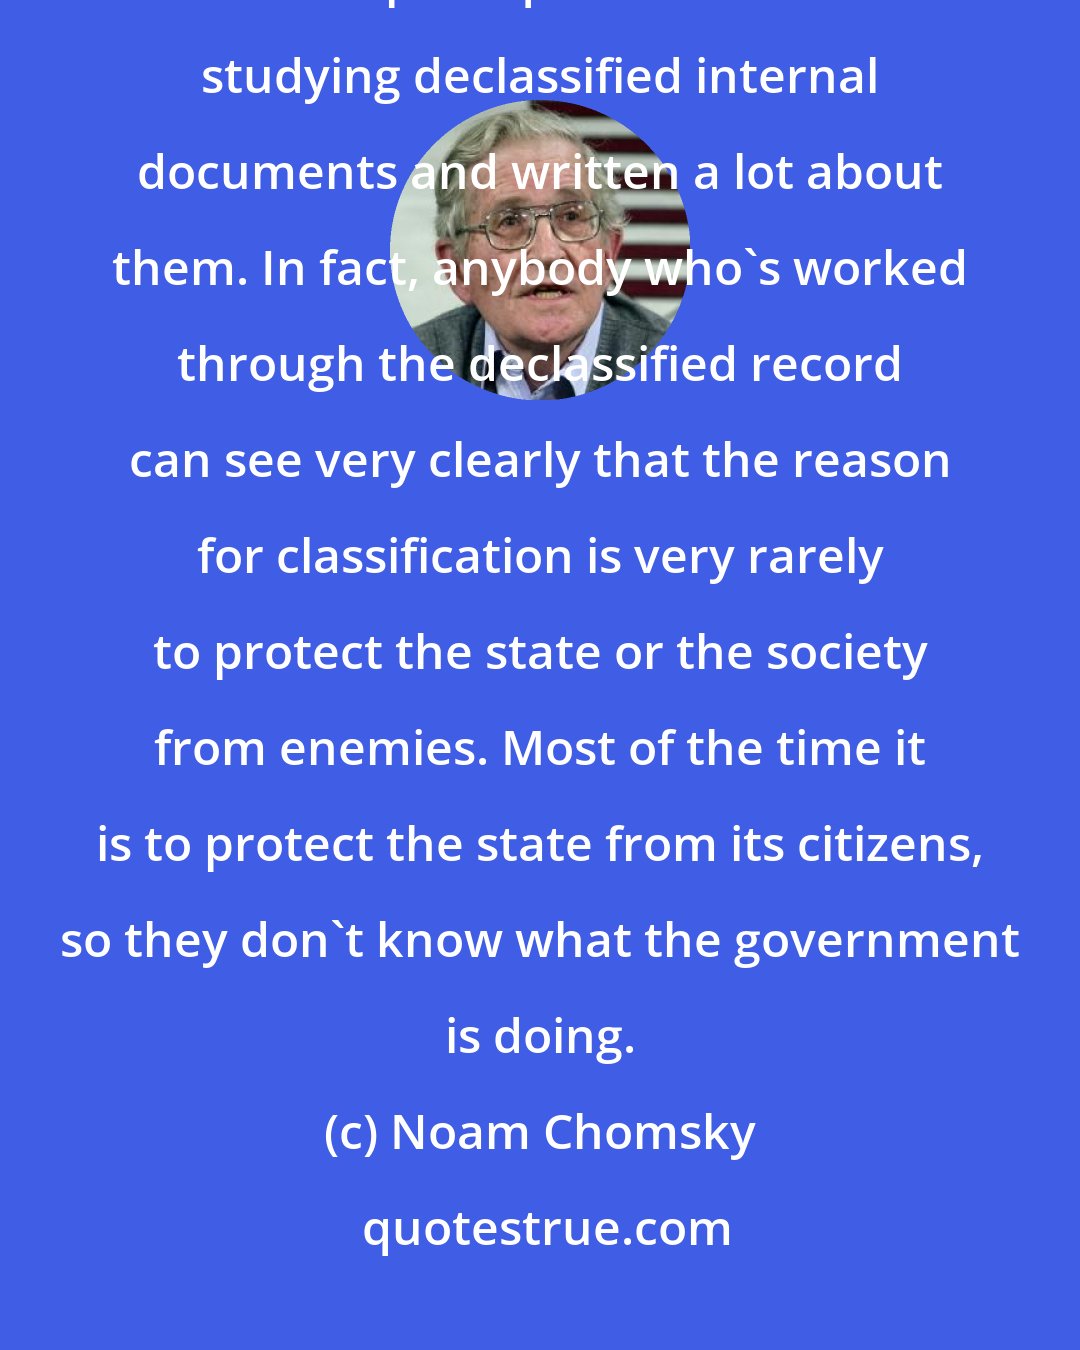 Noam Chomsky: Long before the technology revolution there was declassification of documents and I've spent quite a lot of time studying declassified internal documents and written a lot about them. In fact, anybody who's worked through the declassified record can see very clearly that the reason for classification is very rarely to protect the state or the society from enemies. Most of the time it is to protect the state from its citizens, so they don't know what the government is doing.